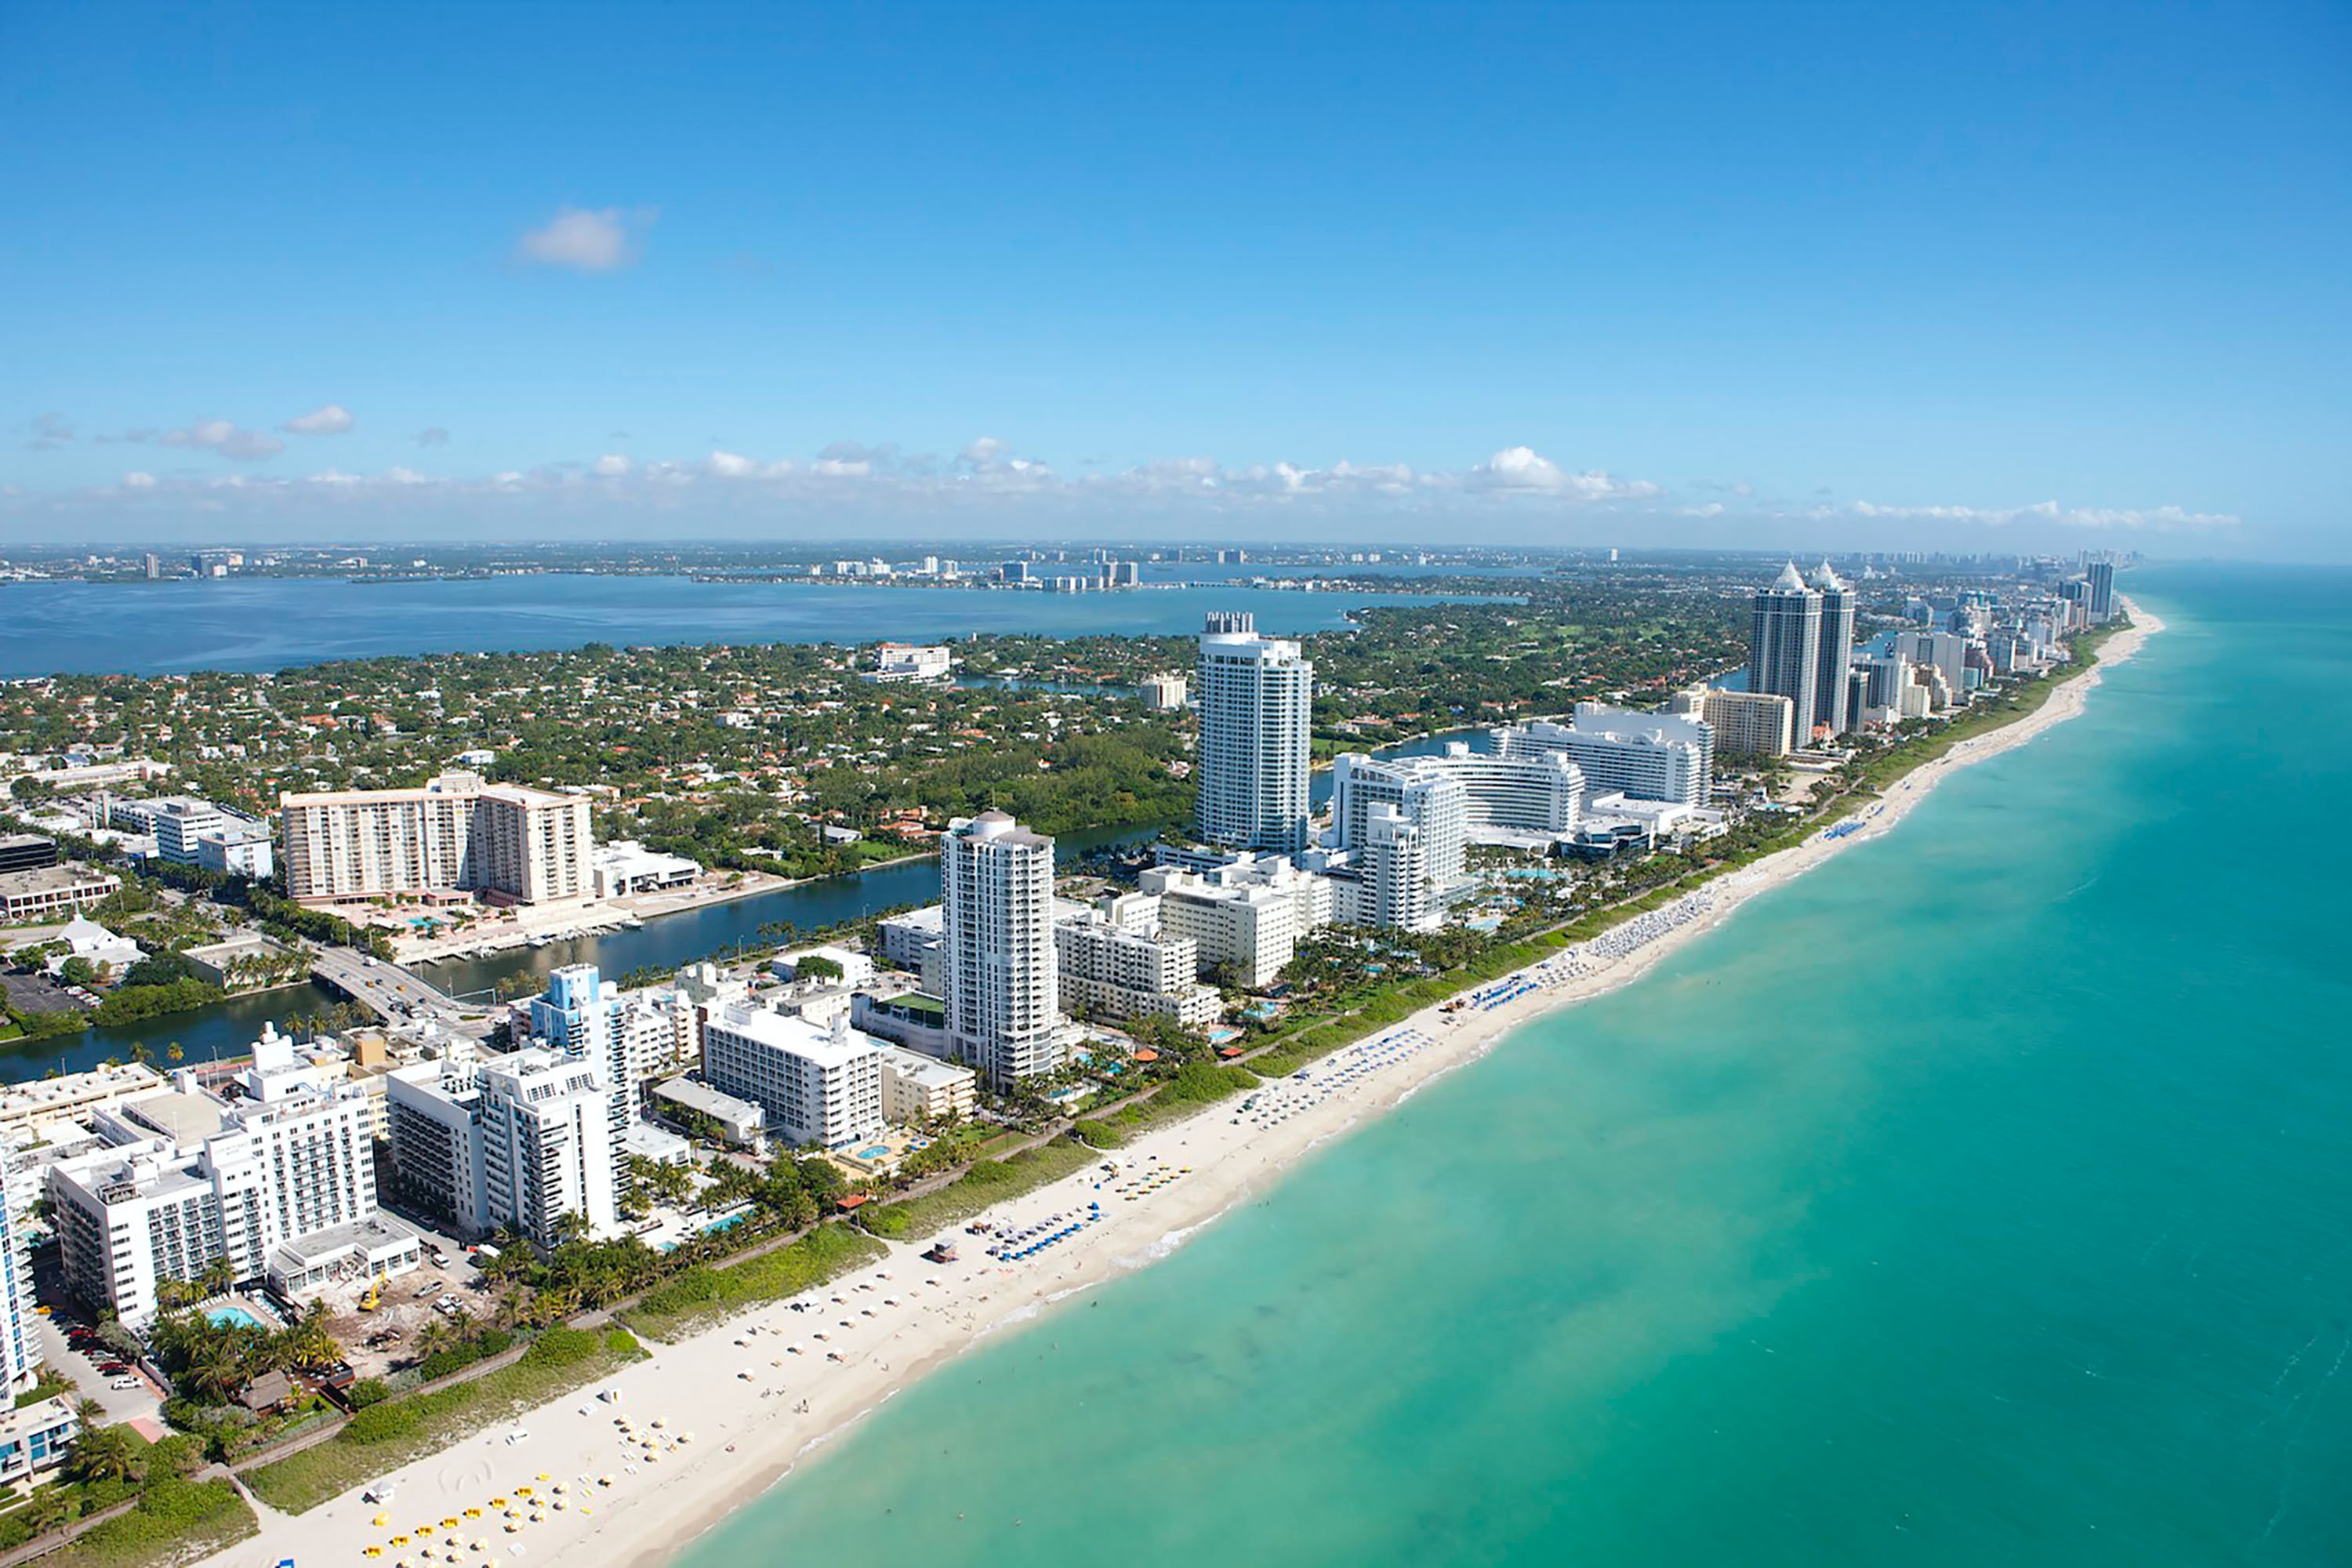 Miami Beach Recognized With Multiple Industry Awards Highlighting its Global Reputation